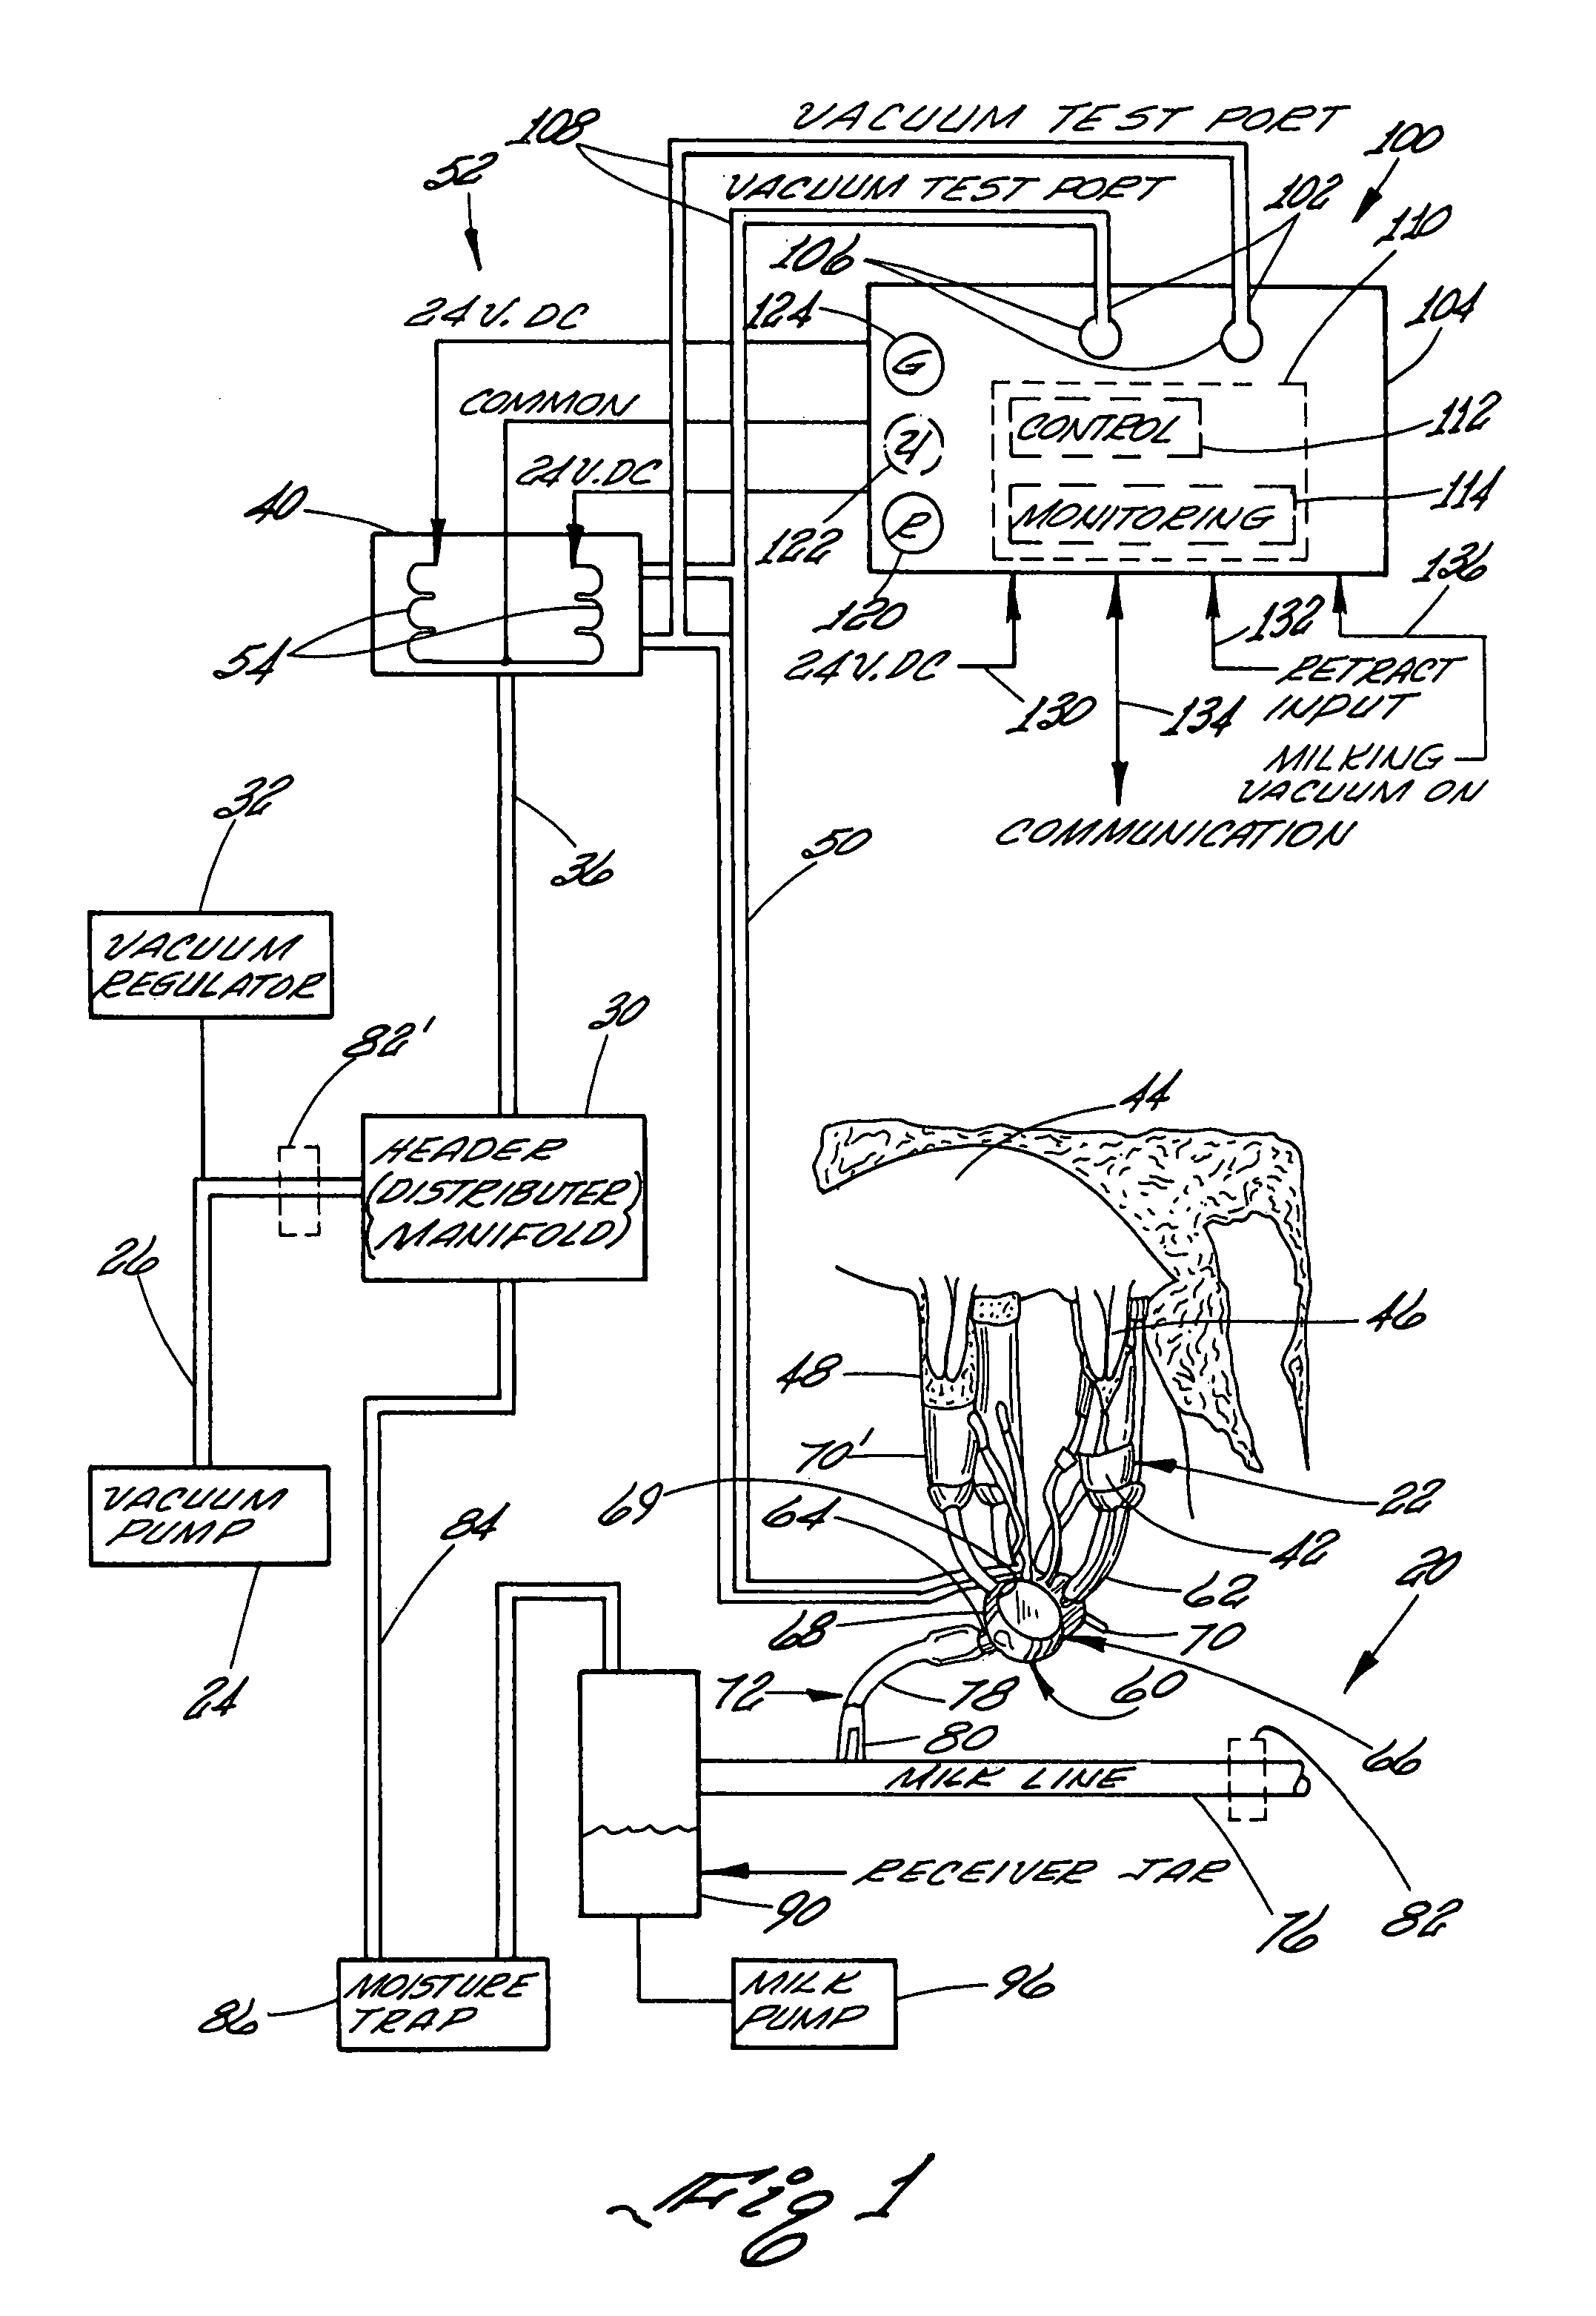 Controller for monitoring and controlling pulsators in a milking system